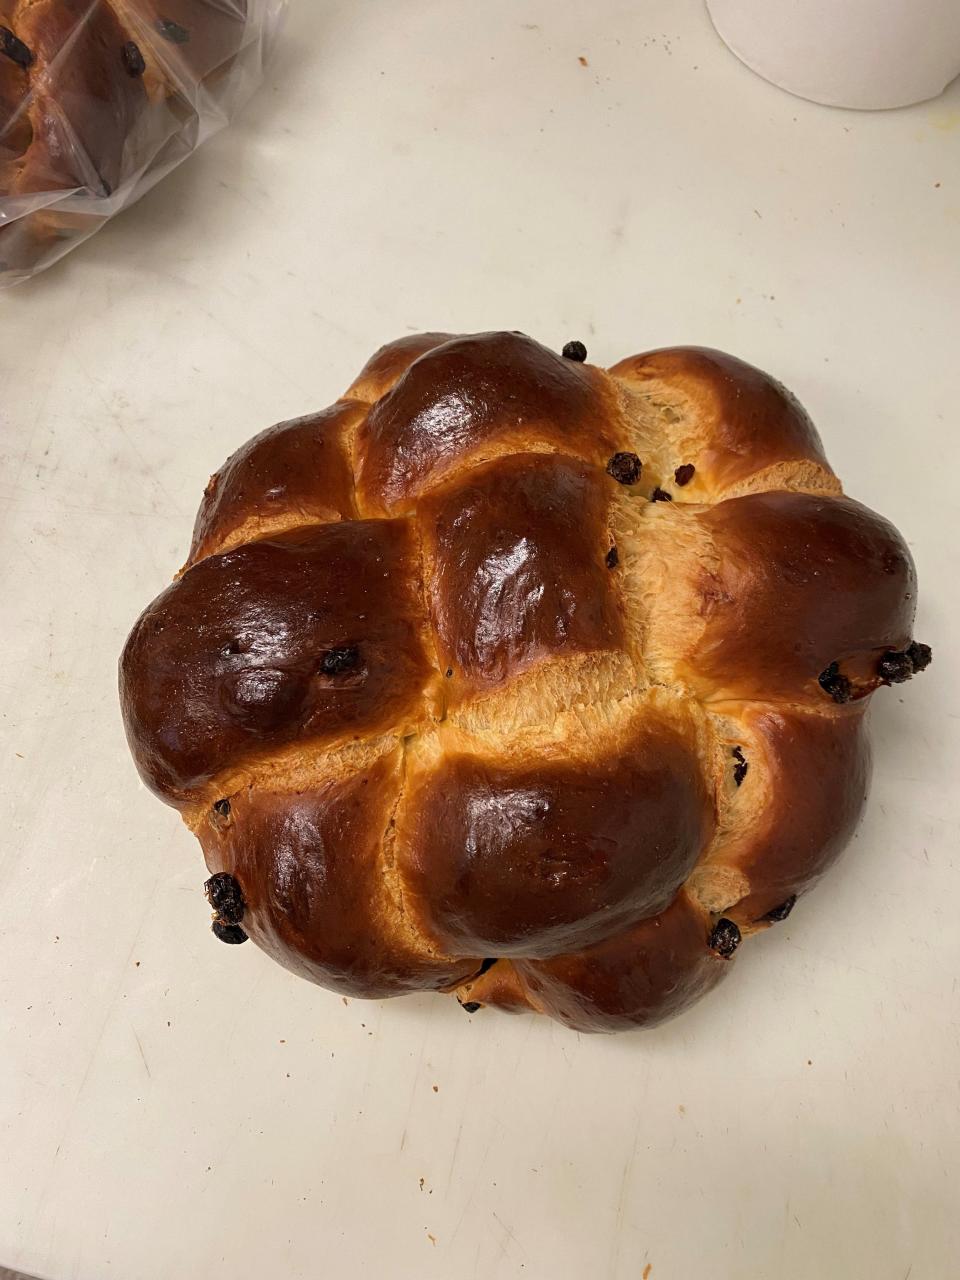 Round raisin challah at French bakery La Tabatiere in Closter.